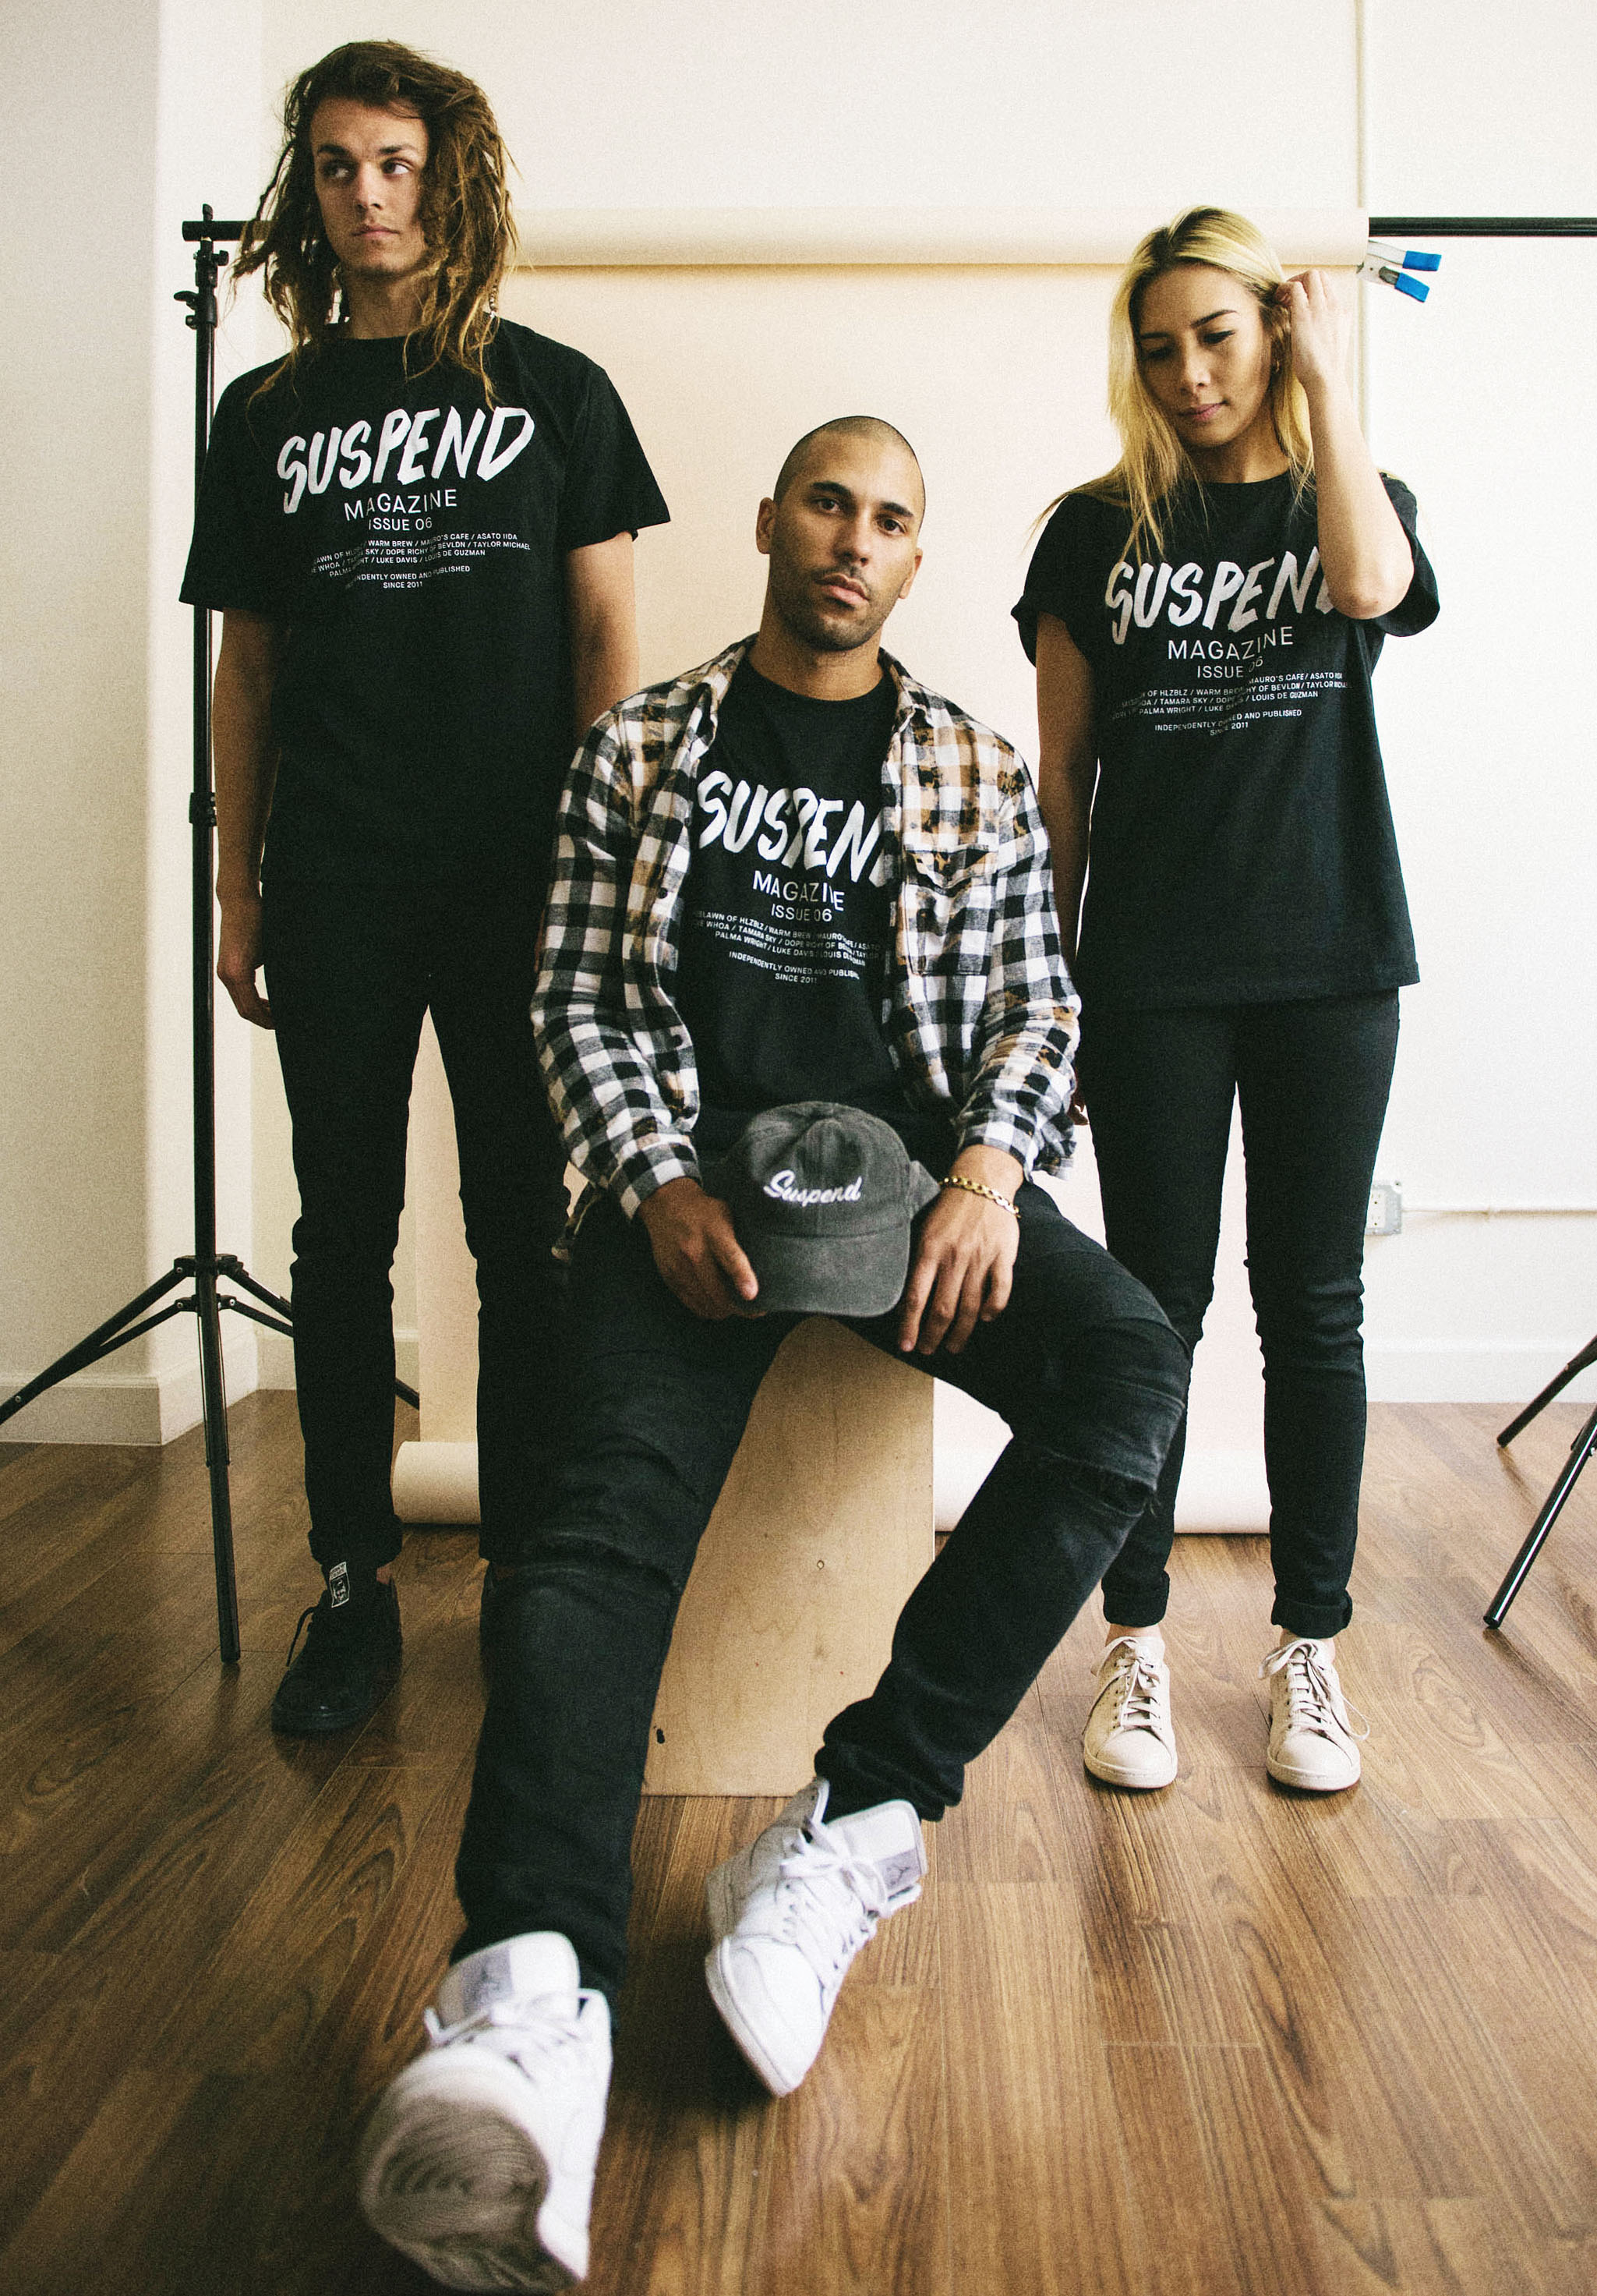  J-Mac, David, and Gilene photographed by EIC Diane Abapo for SUSPEND® Magazine. 